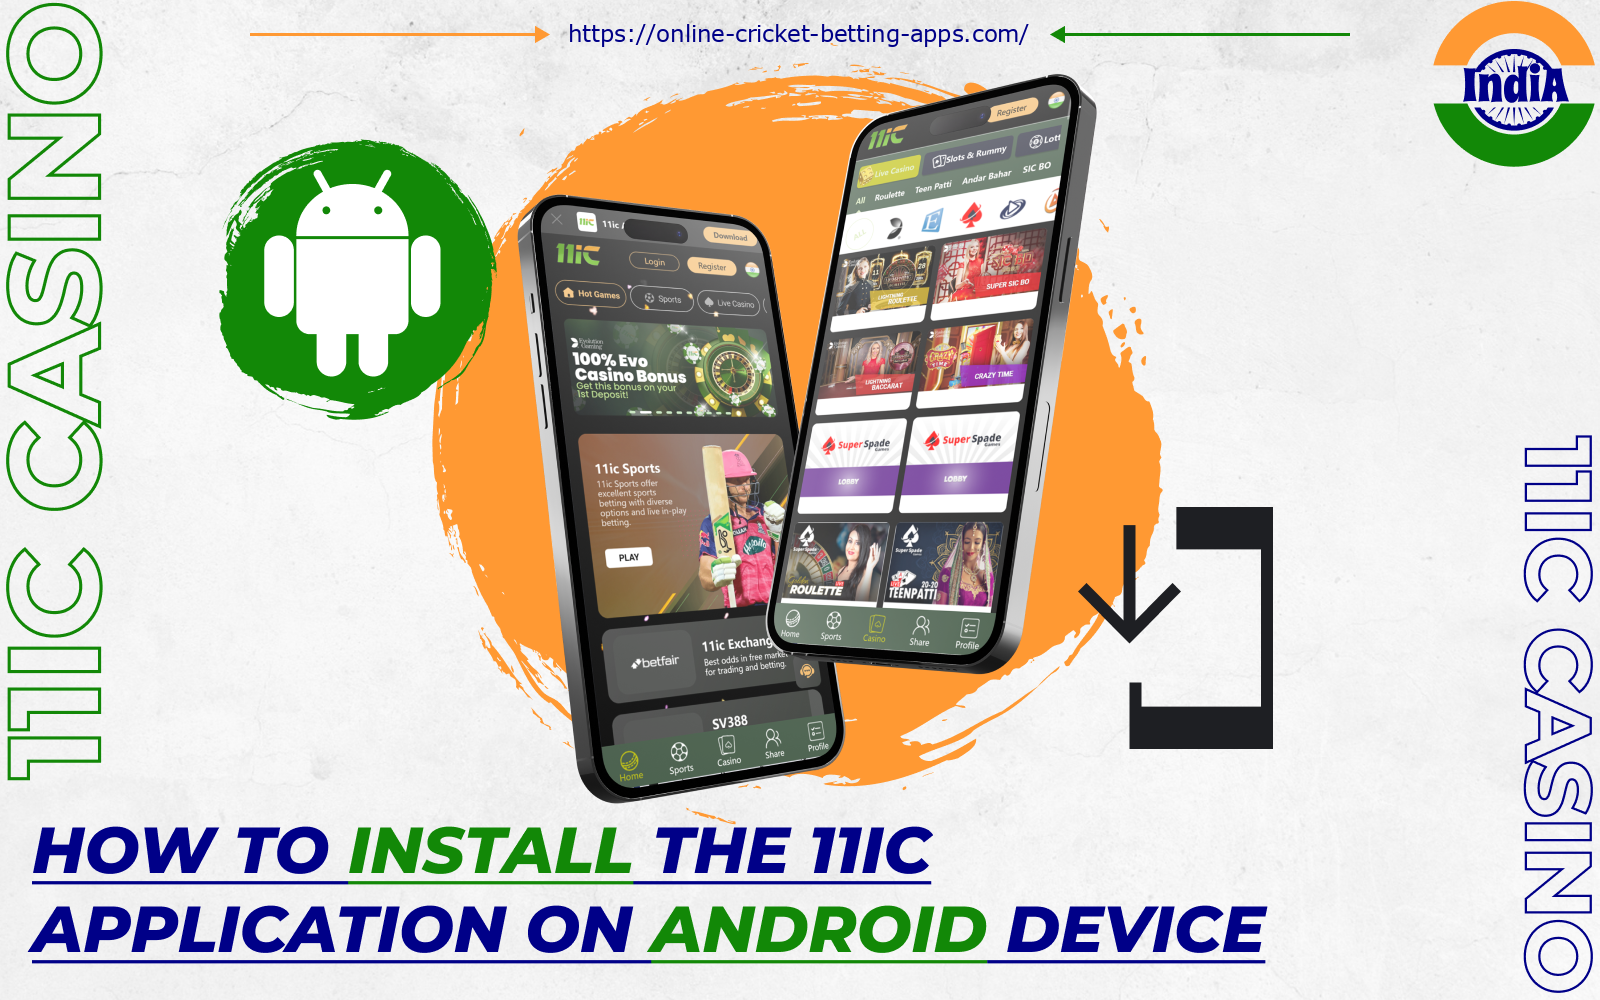 After installing the 11ic mobile app for Android, Indian users will have access to cricket betting and casino games